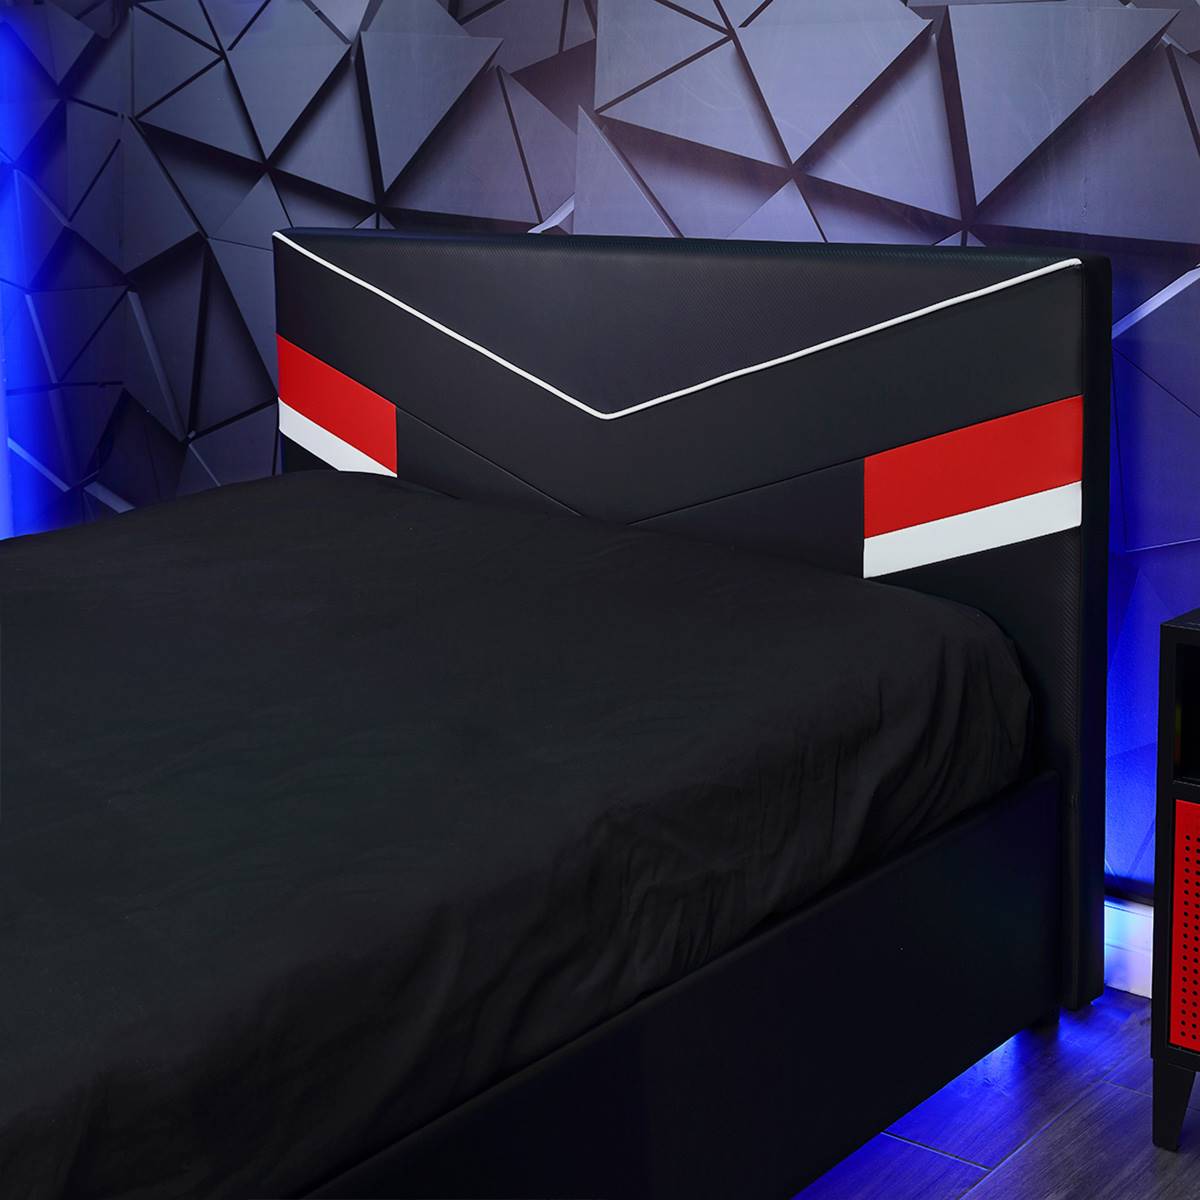 X Rocker Orion ESports Gaming Full Size Bed Frame